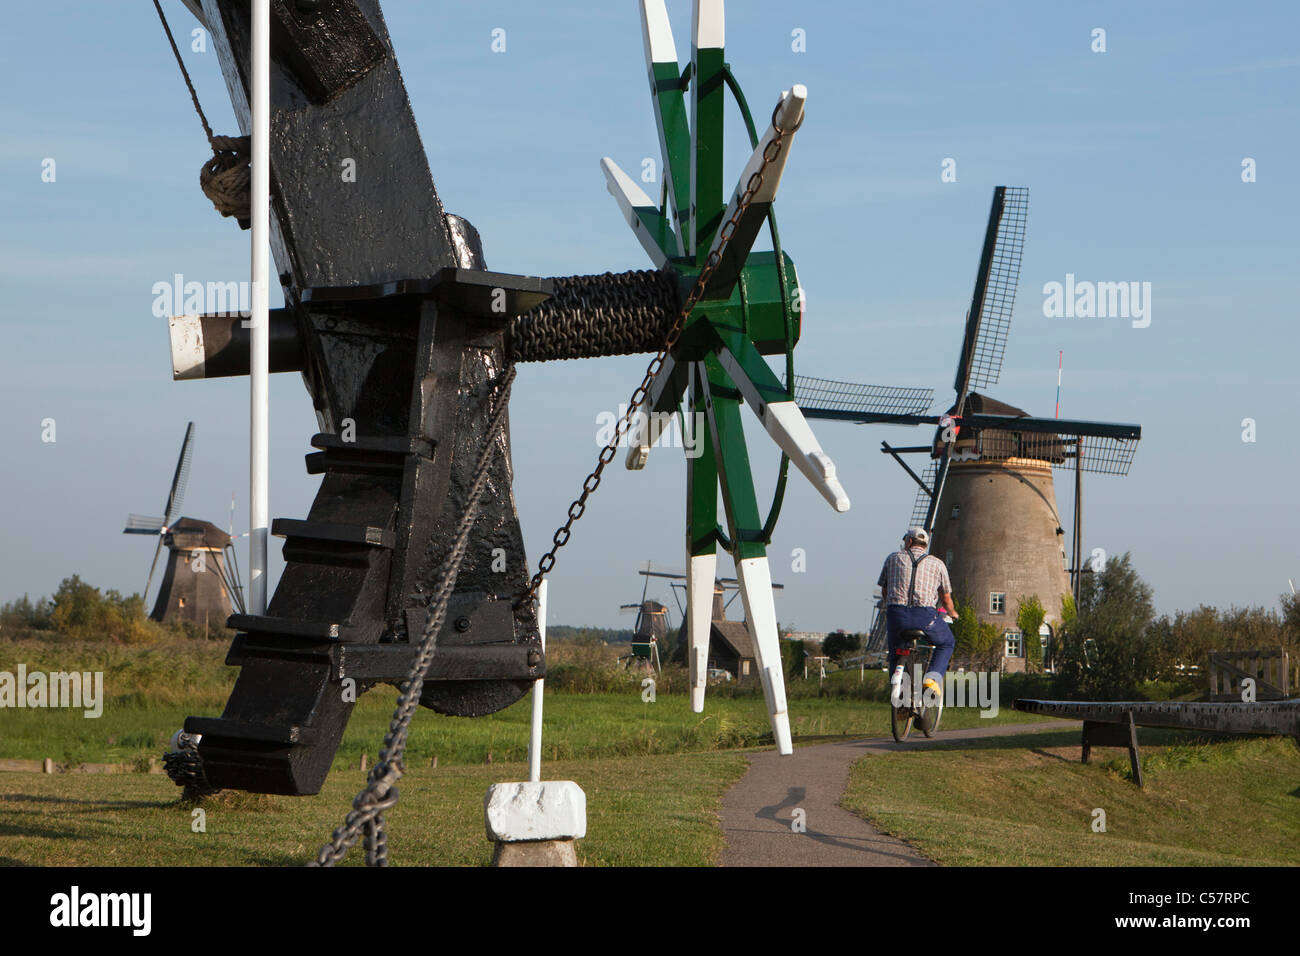 The Netherlands, Kinderdijk, Windmills, Unesco World Heritage Site. Miller with wooden shoes on bicycle Stock Photo